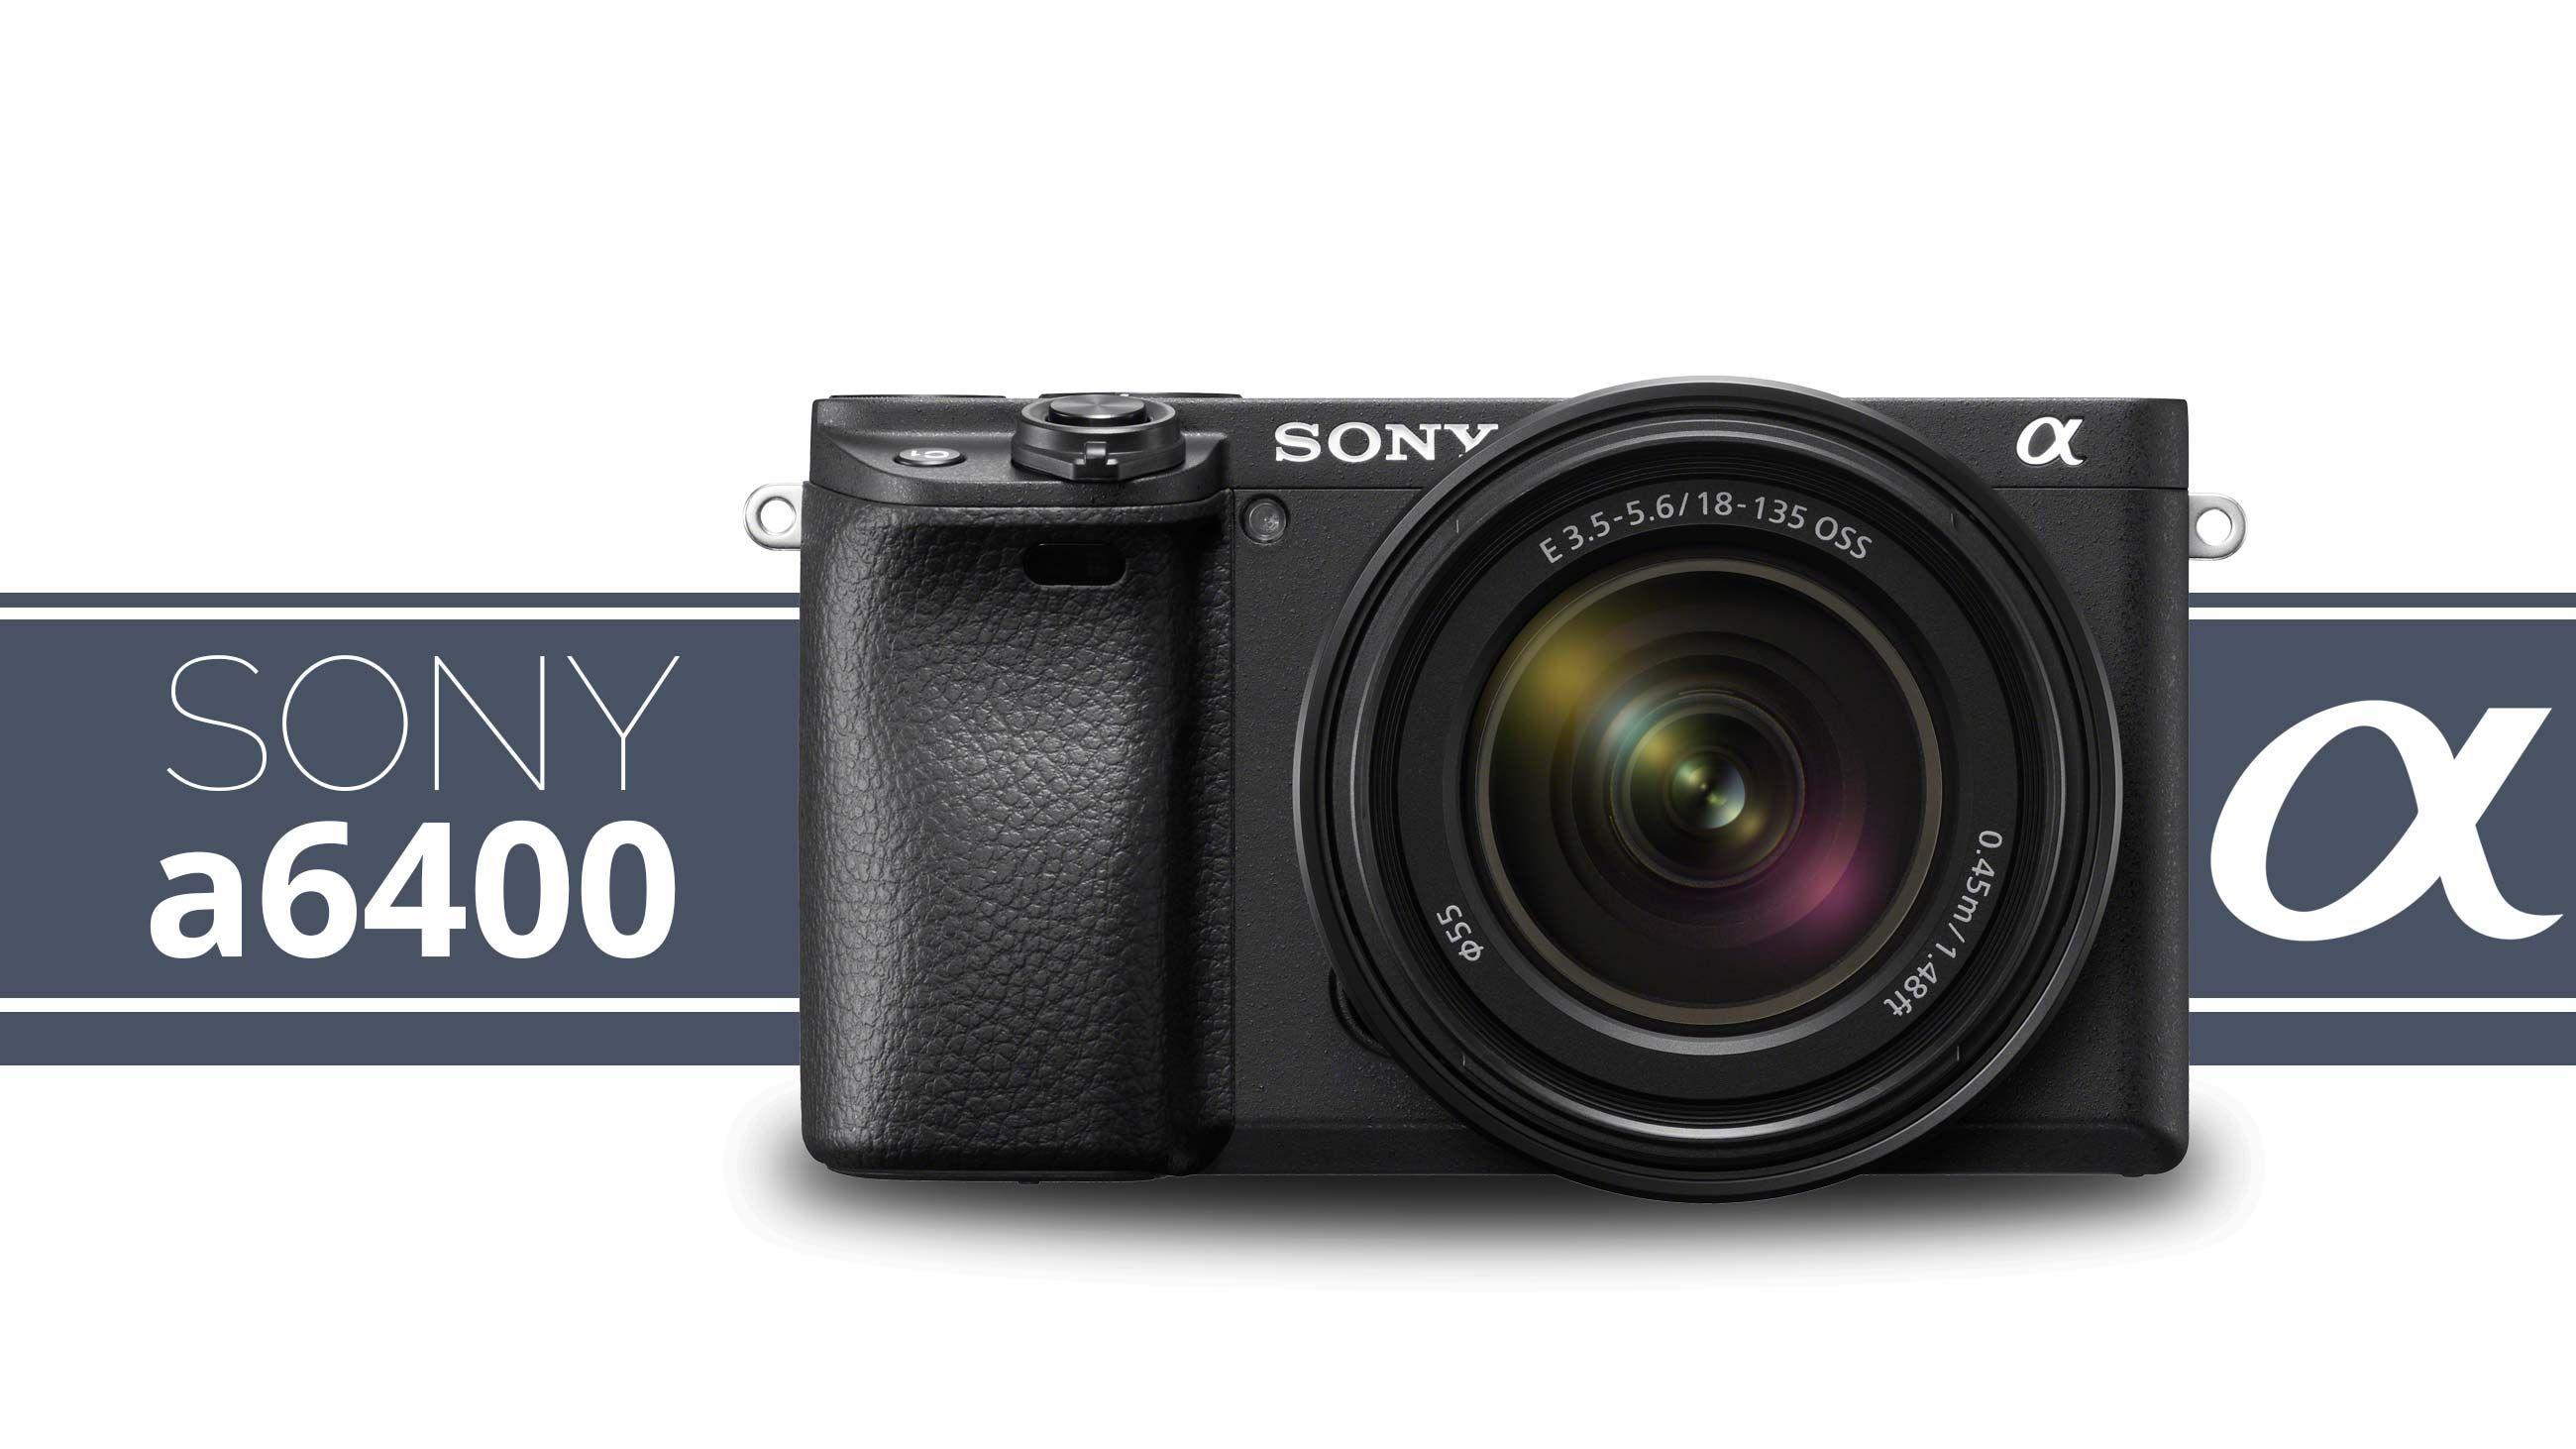 Sony Camera Logo - SONY Announces a6400, Firmware Updates, New Software – Light And Matter